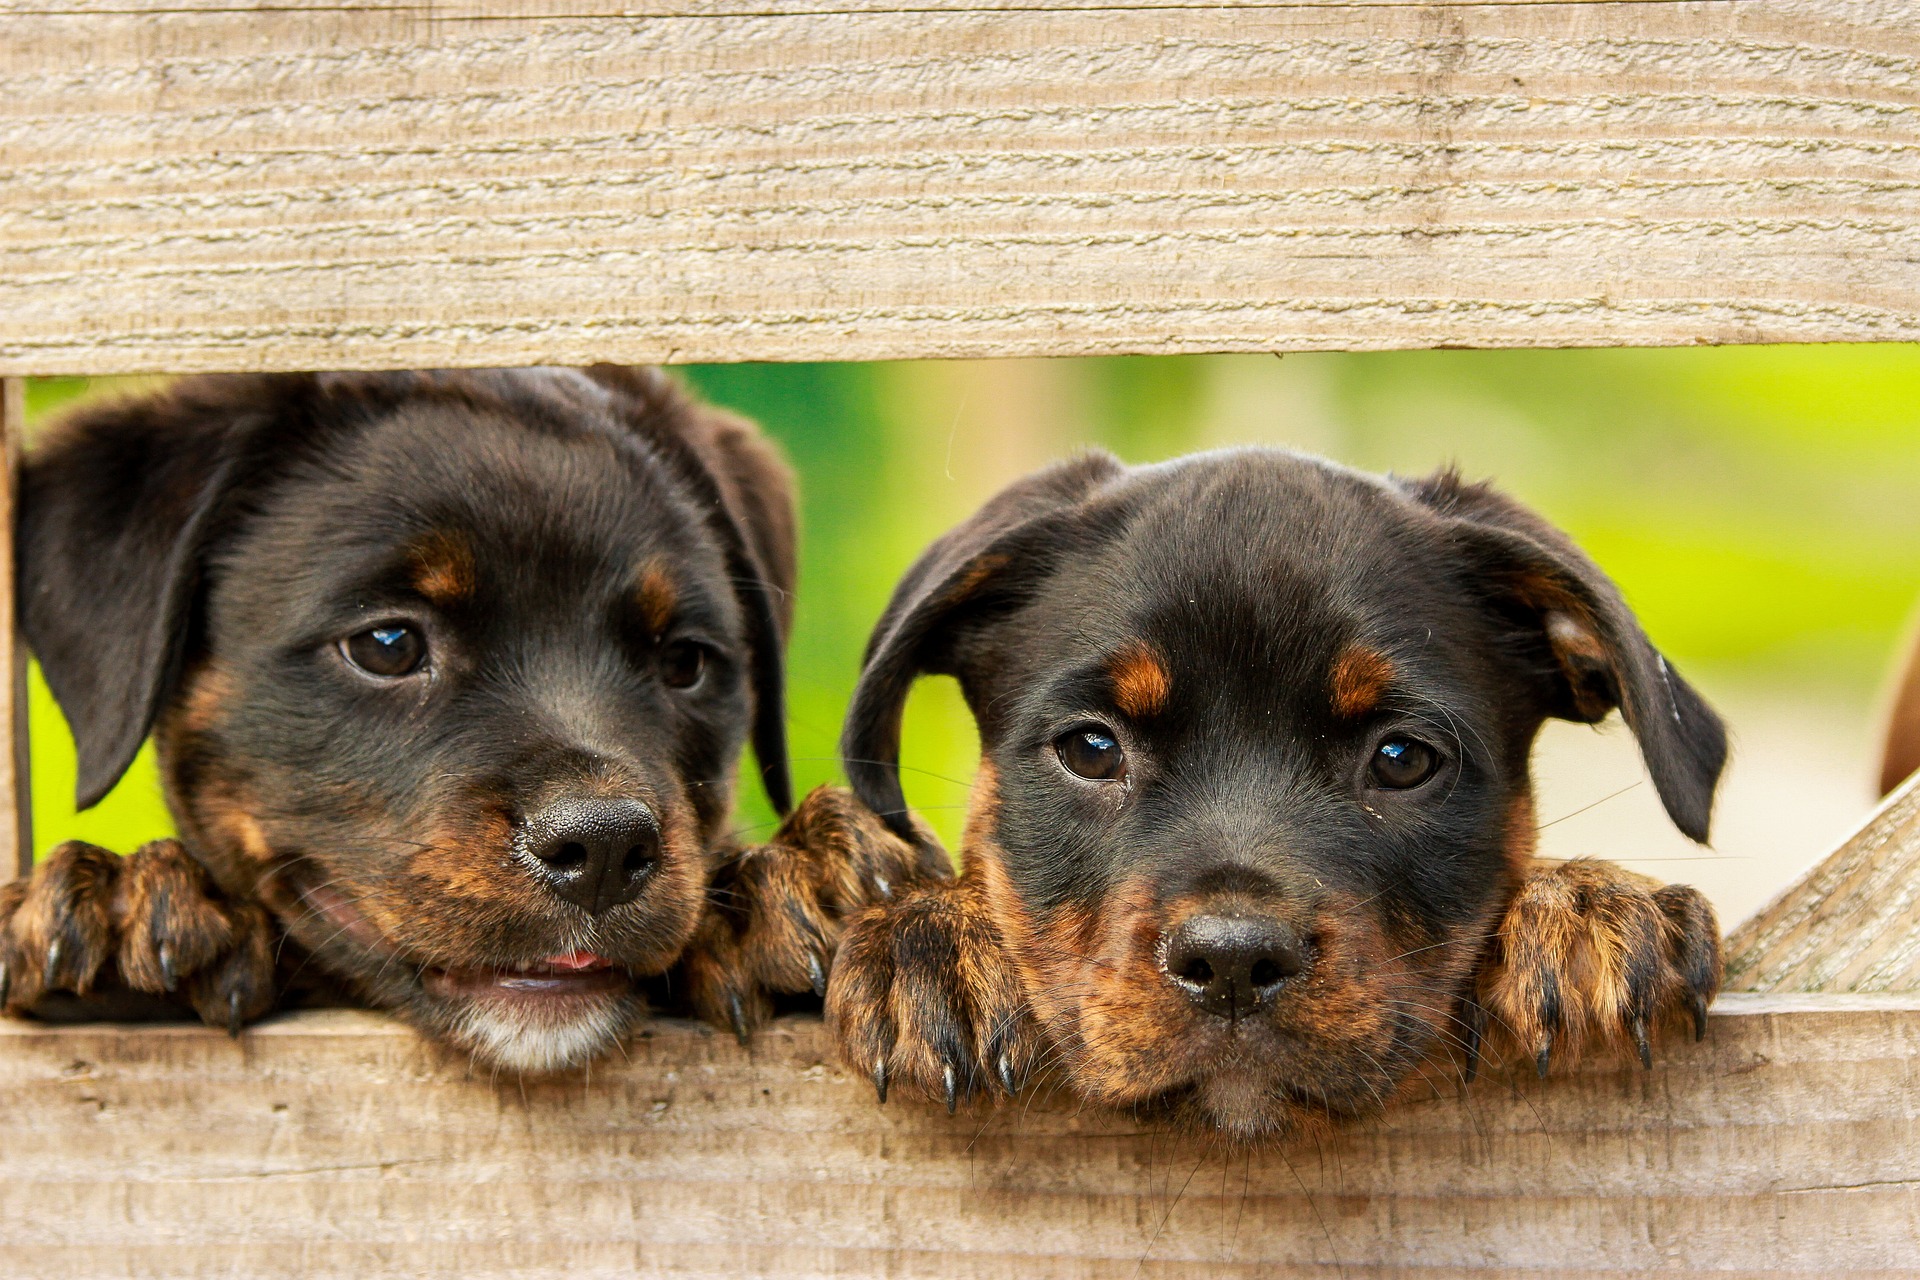 Two puppies peeking over the fence